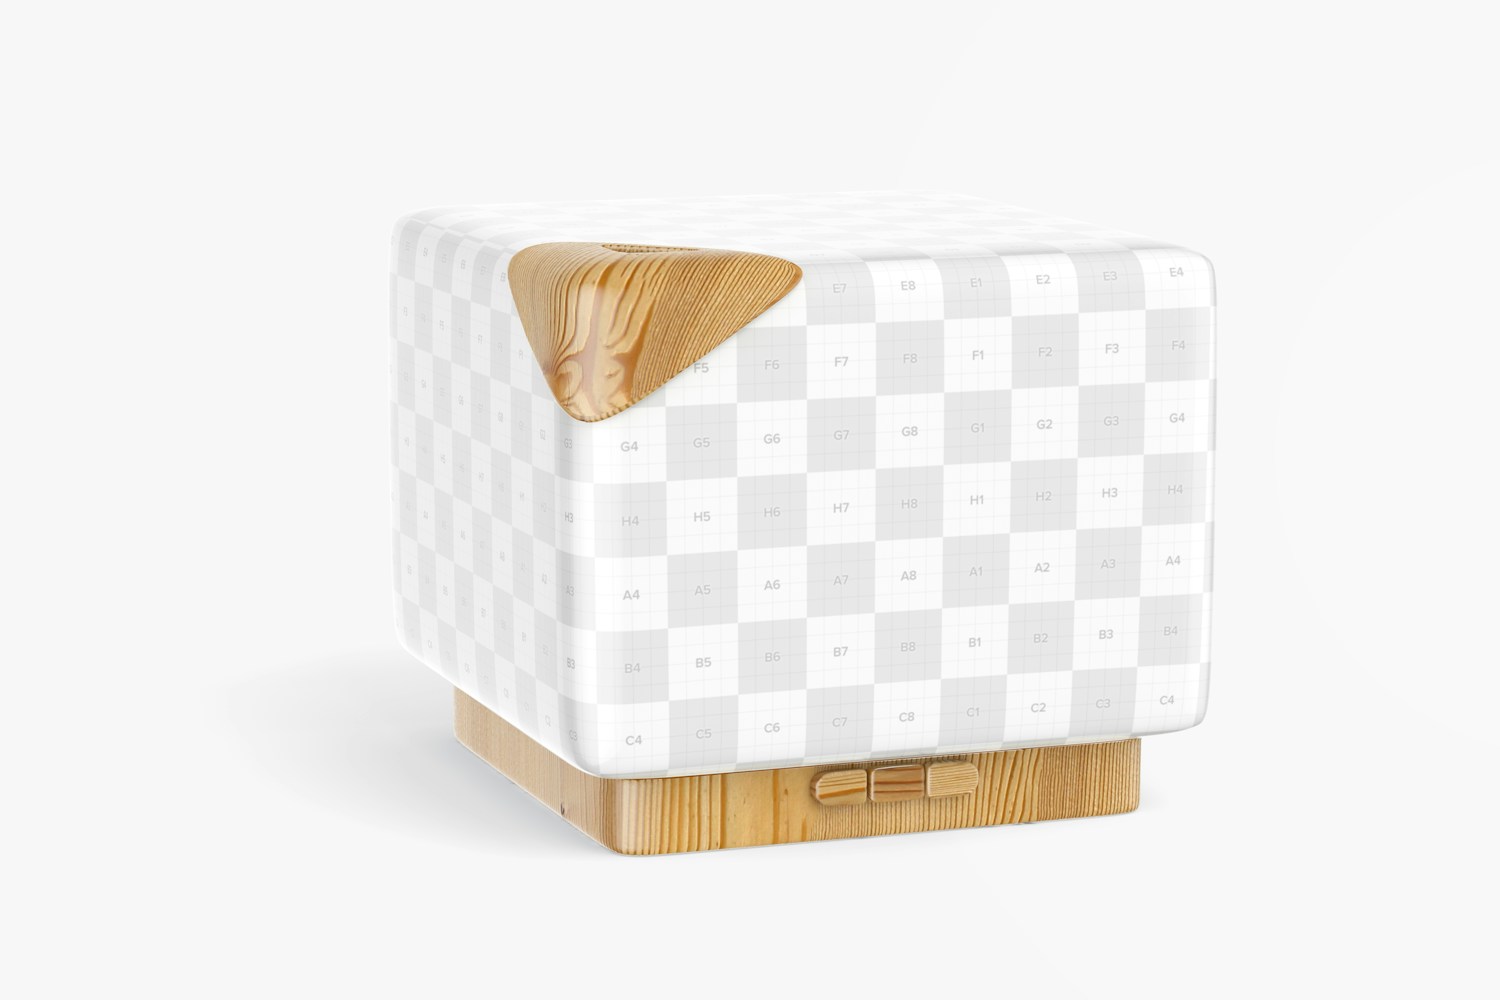 Electric Fragrance Diffuser Mockup, Perspective